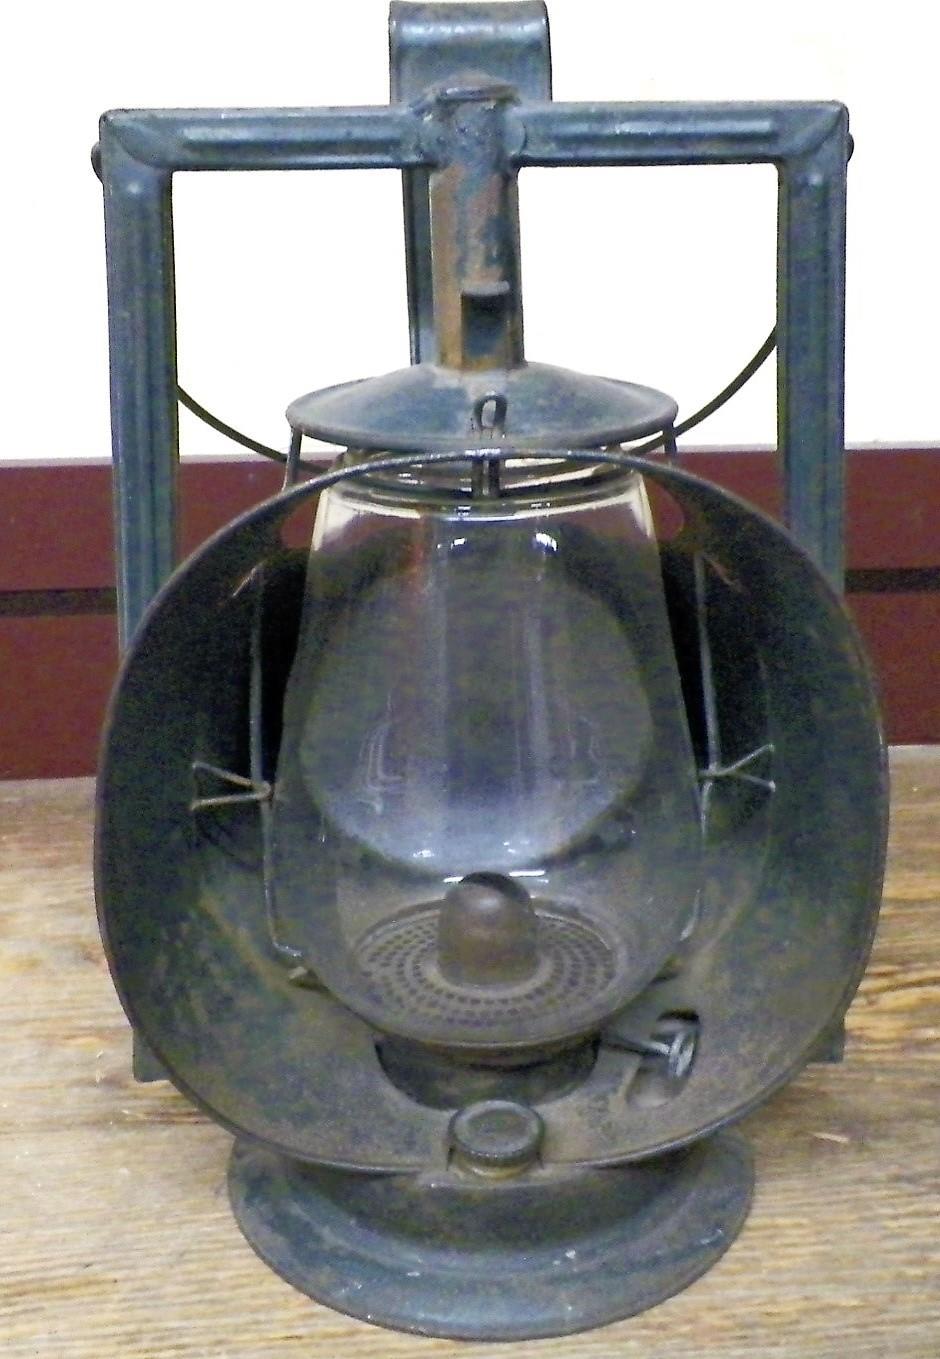 Inspector & Track Walker Lamp Dietz: ACME Inspector Lamp The inspector s Kerosene lamp was used by railroad workers for checking the journal boxes on rolling stock.